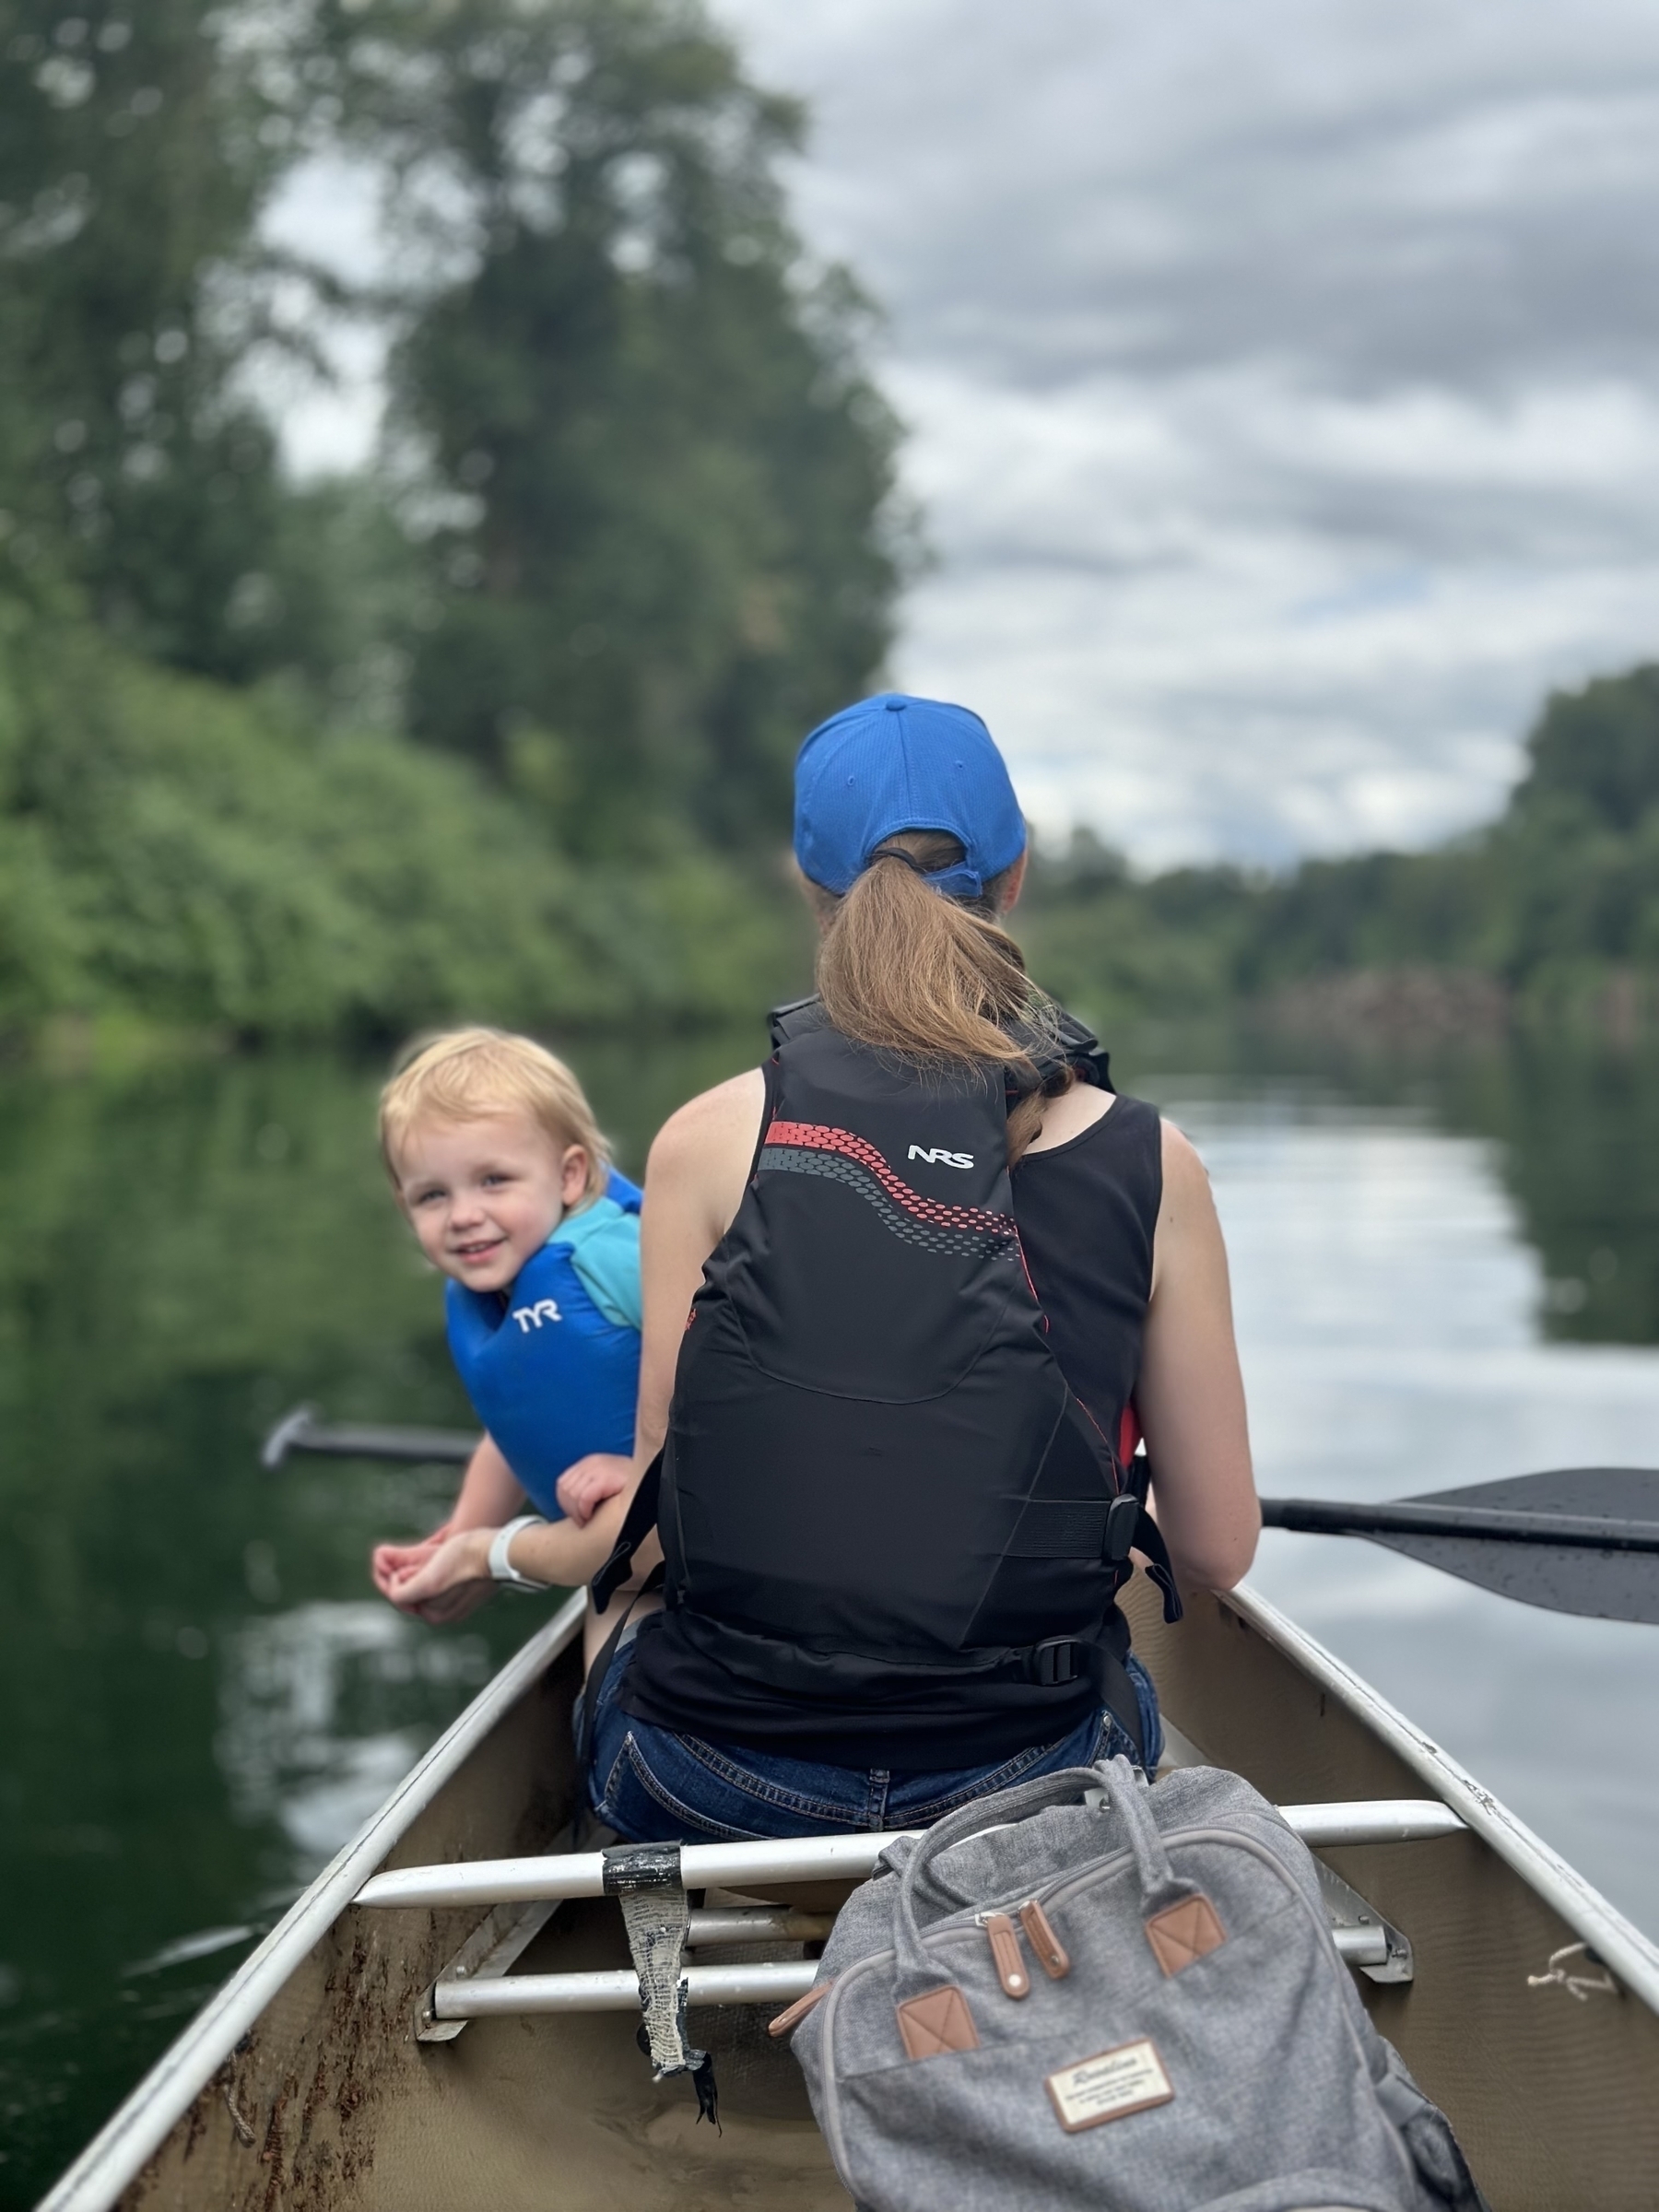 A person wearing a blue cap and a black life jacket is sitting in a canoe paddling on a calm river, with a smiling child also in the canoe surrounded by trees and a cloudy sky.